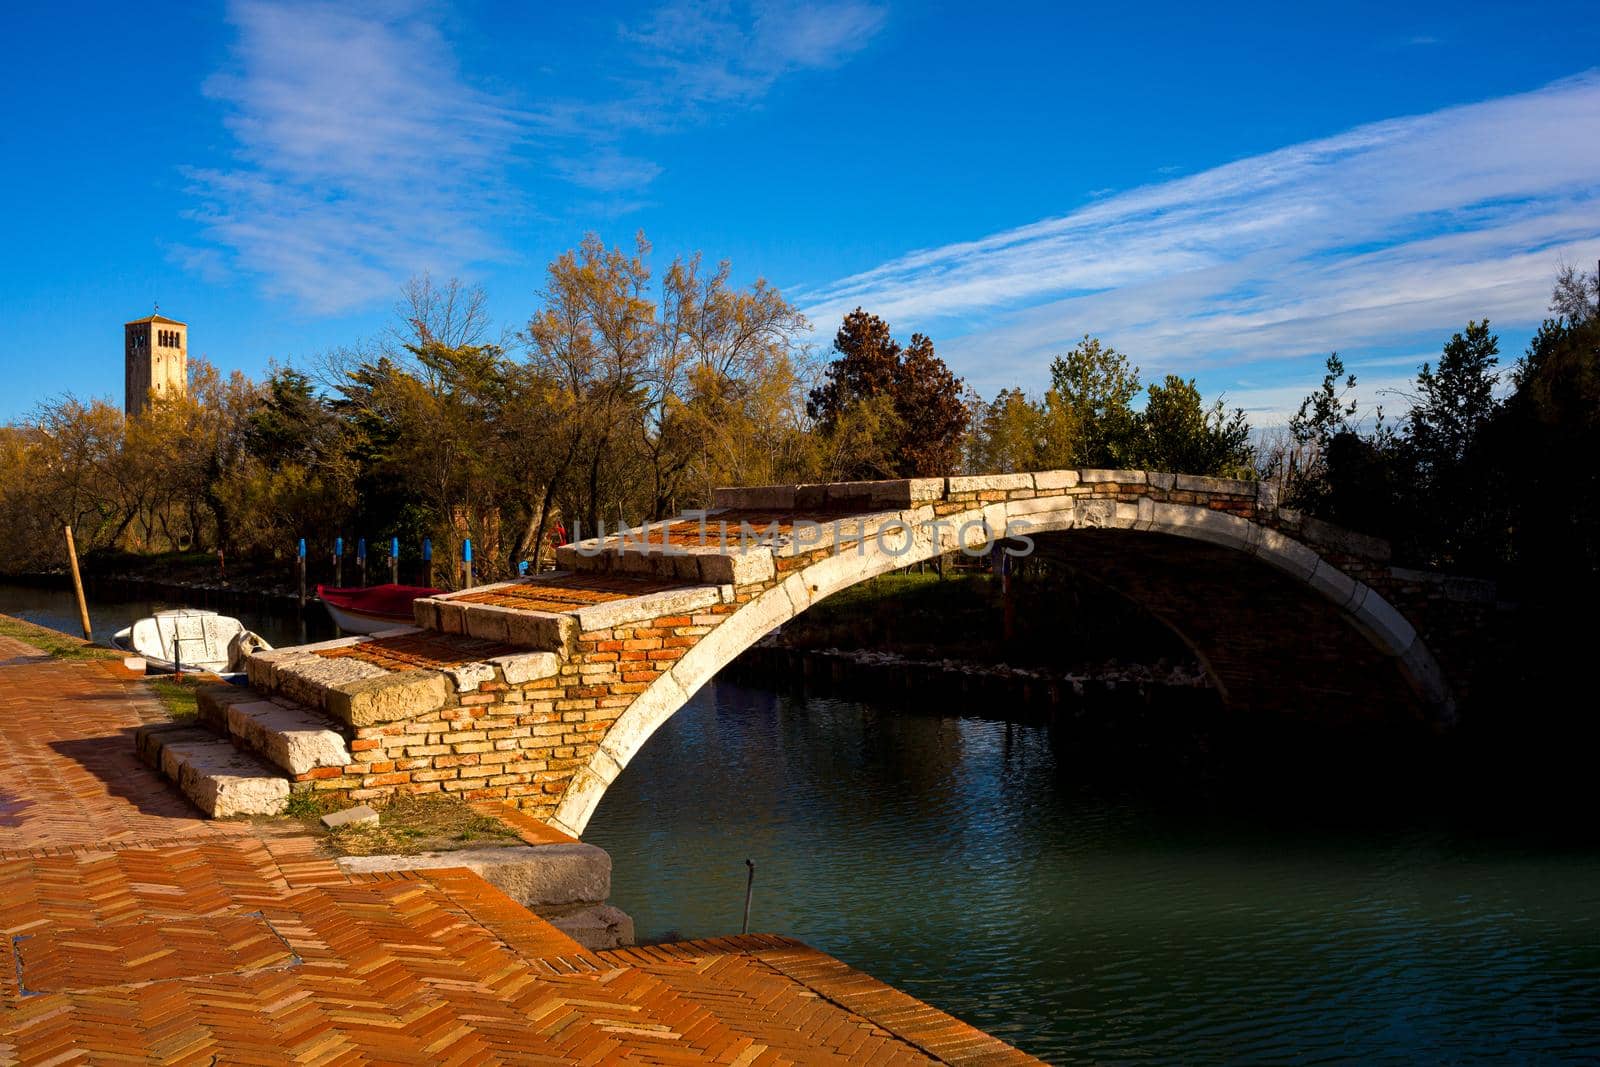 View of the Devil's Bridge in the island of Torcello, Venice. Italy